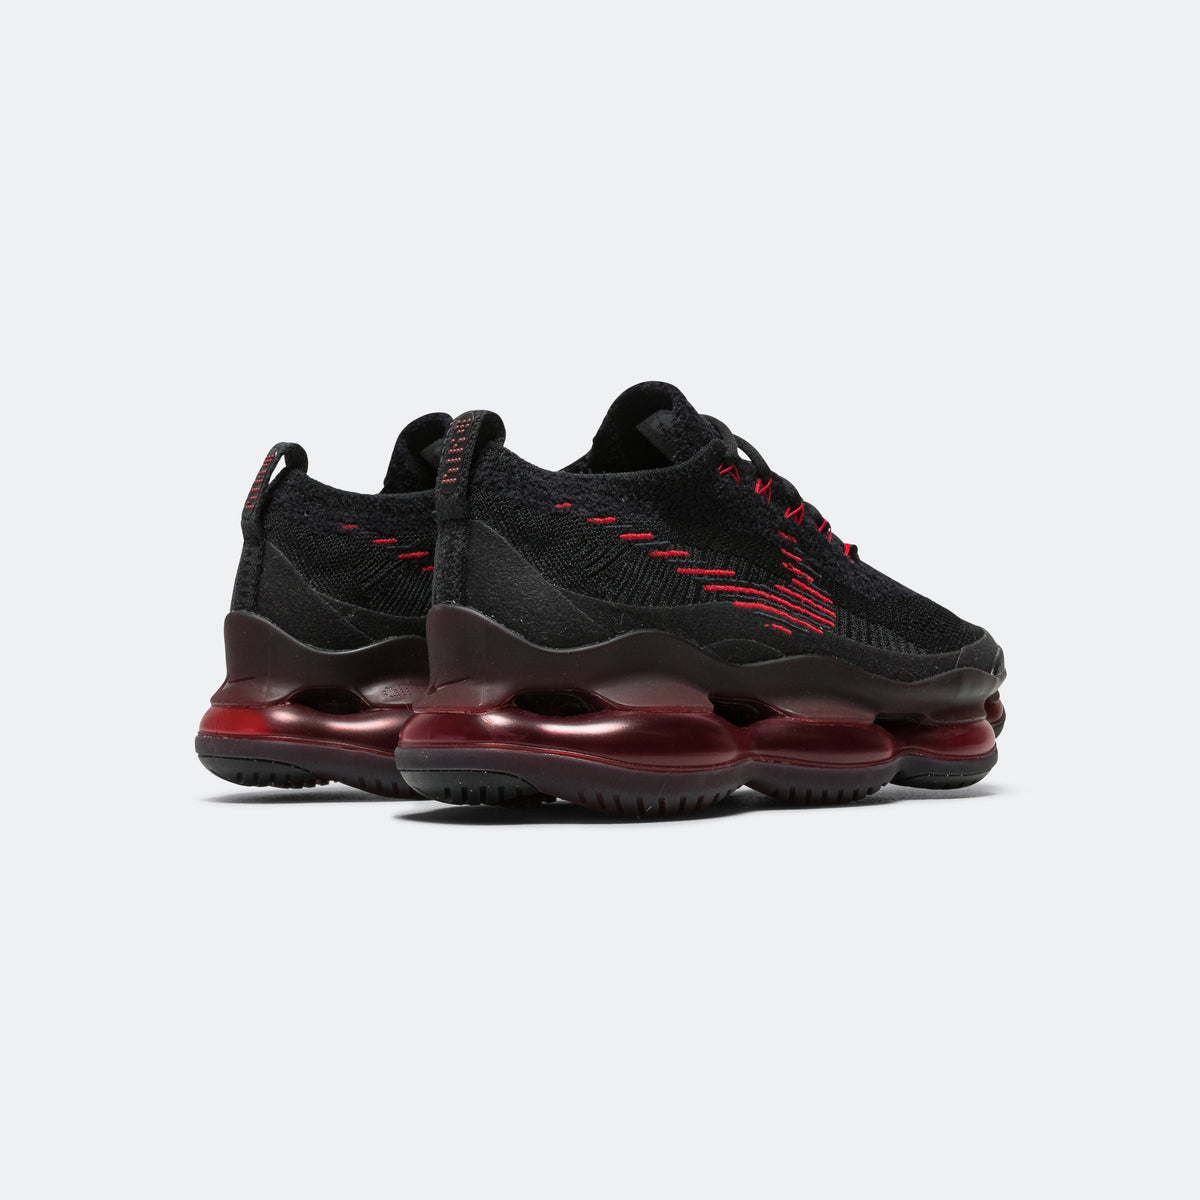 Nike Air Max Scorpion FK - Black/University Red-Black | Up There | UP THERE